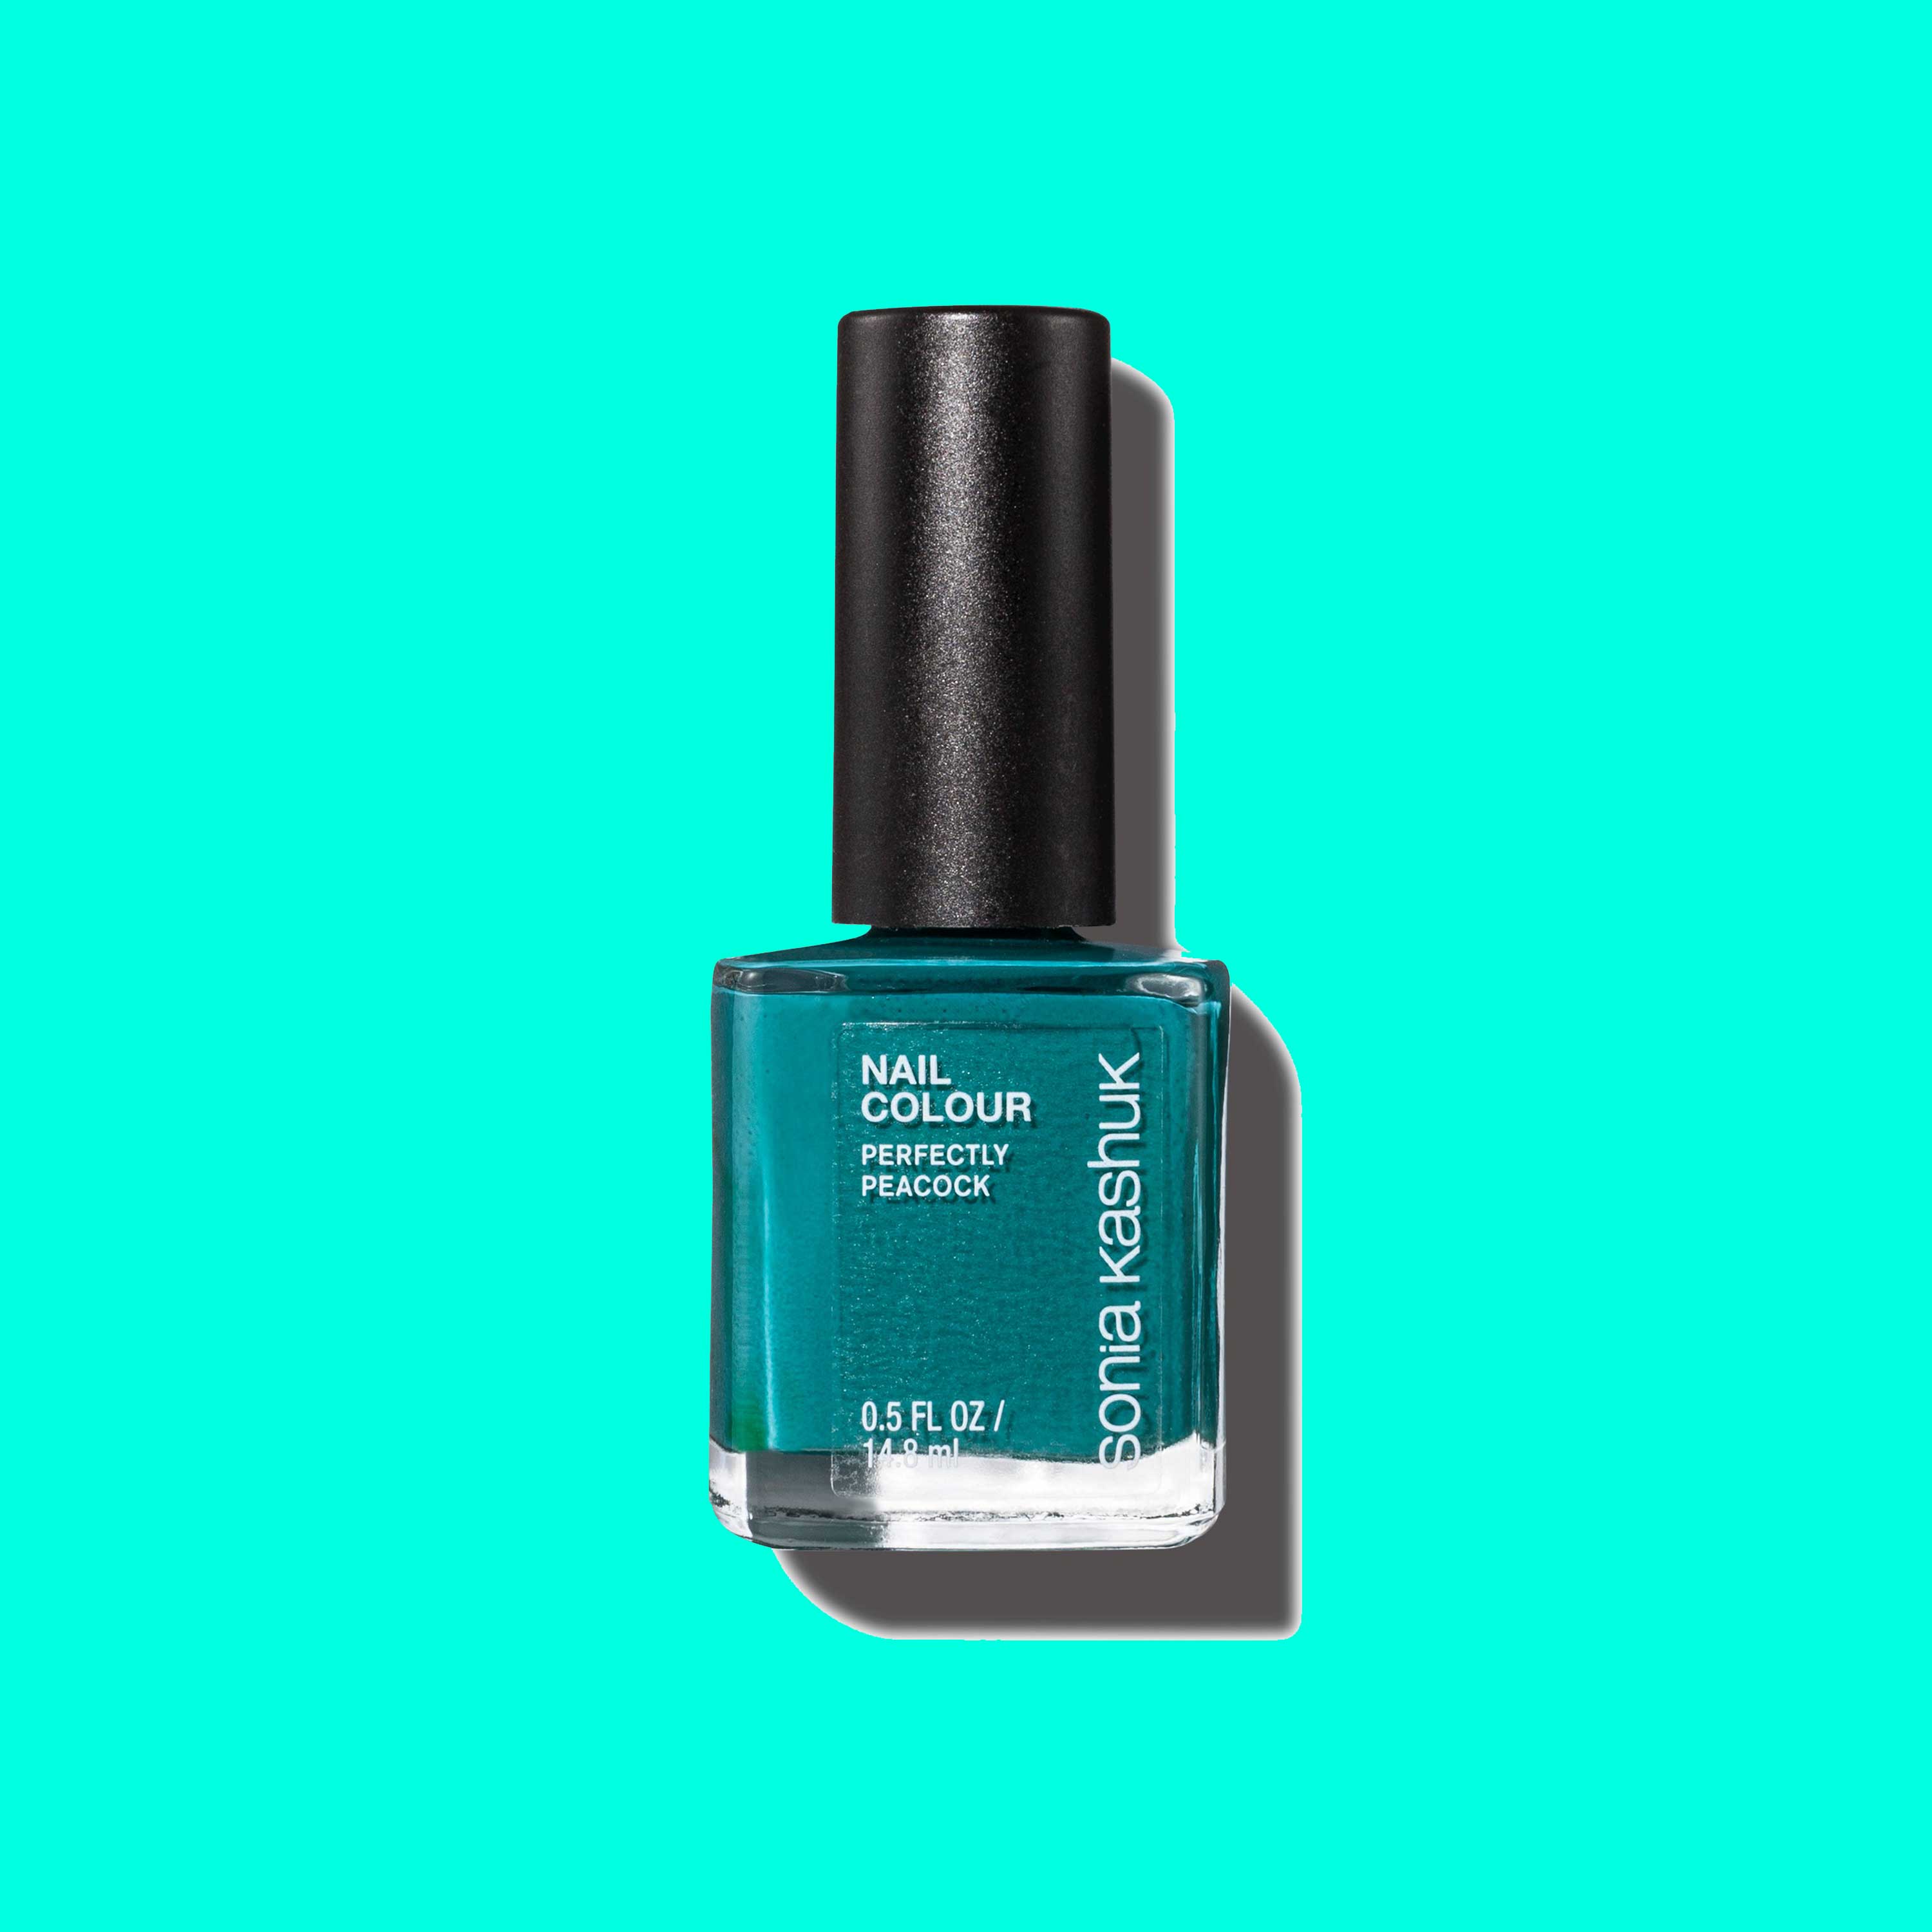 The Hottest Nail Polish Colors that Work Best for Black Women
